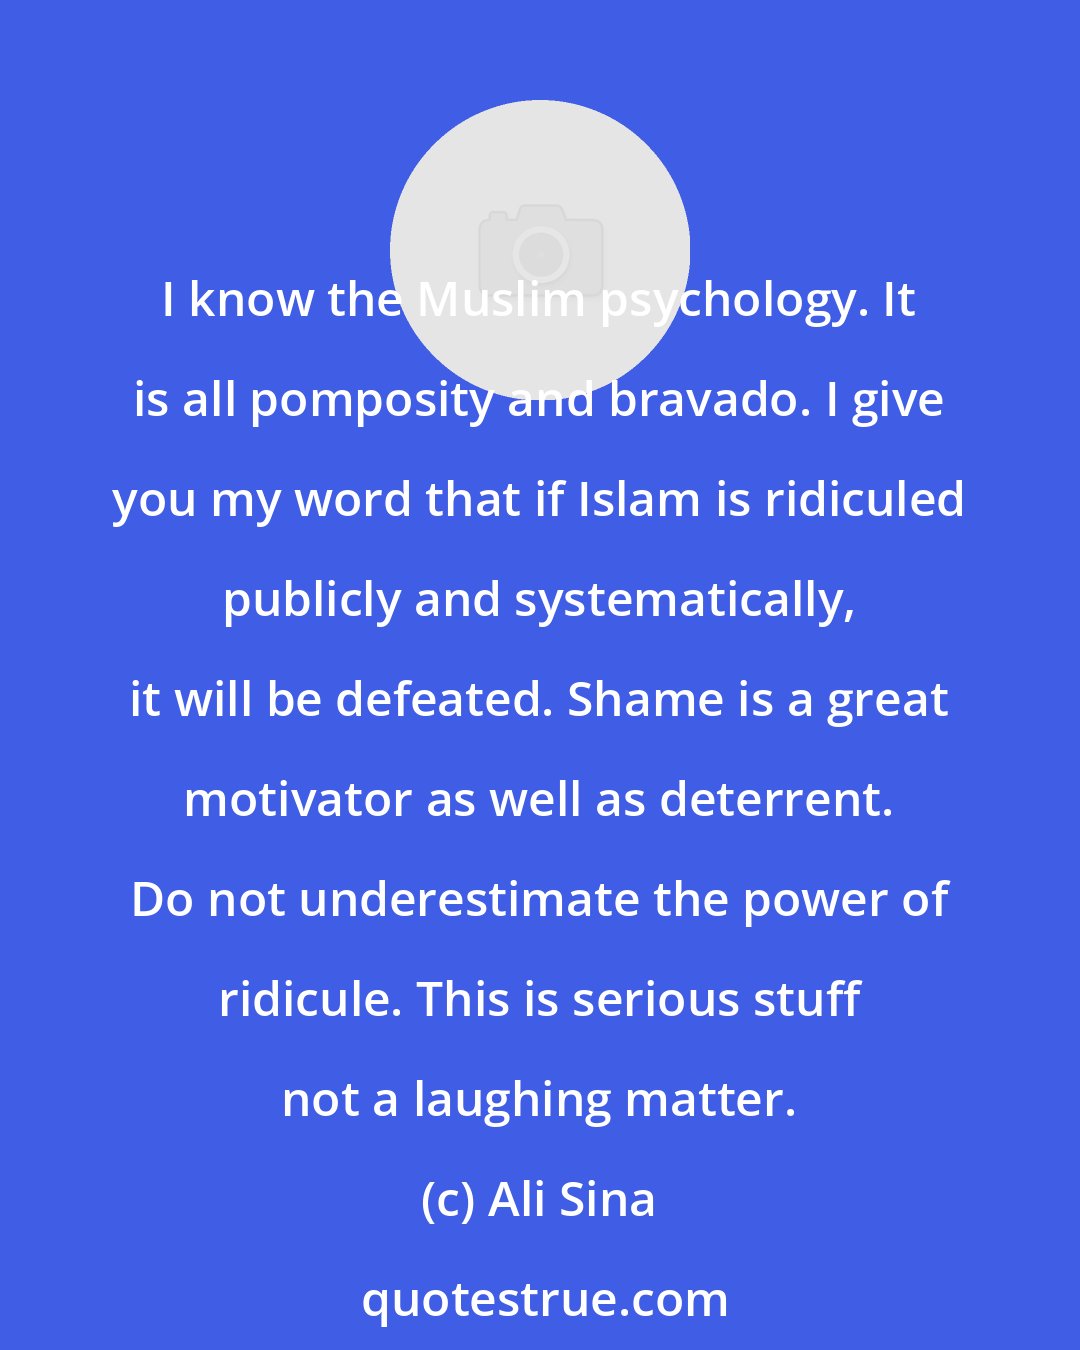 Ali Sina: I know the Muslim psychology. It is all pomposity and bravado. I give you my word that if Islam is ridiculed publicly and systematically, it will be defeated. Shame is a great motivator as well as deterrent. Do not underestimate the power of ridicule. This is serious stuff not a laughing matter.